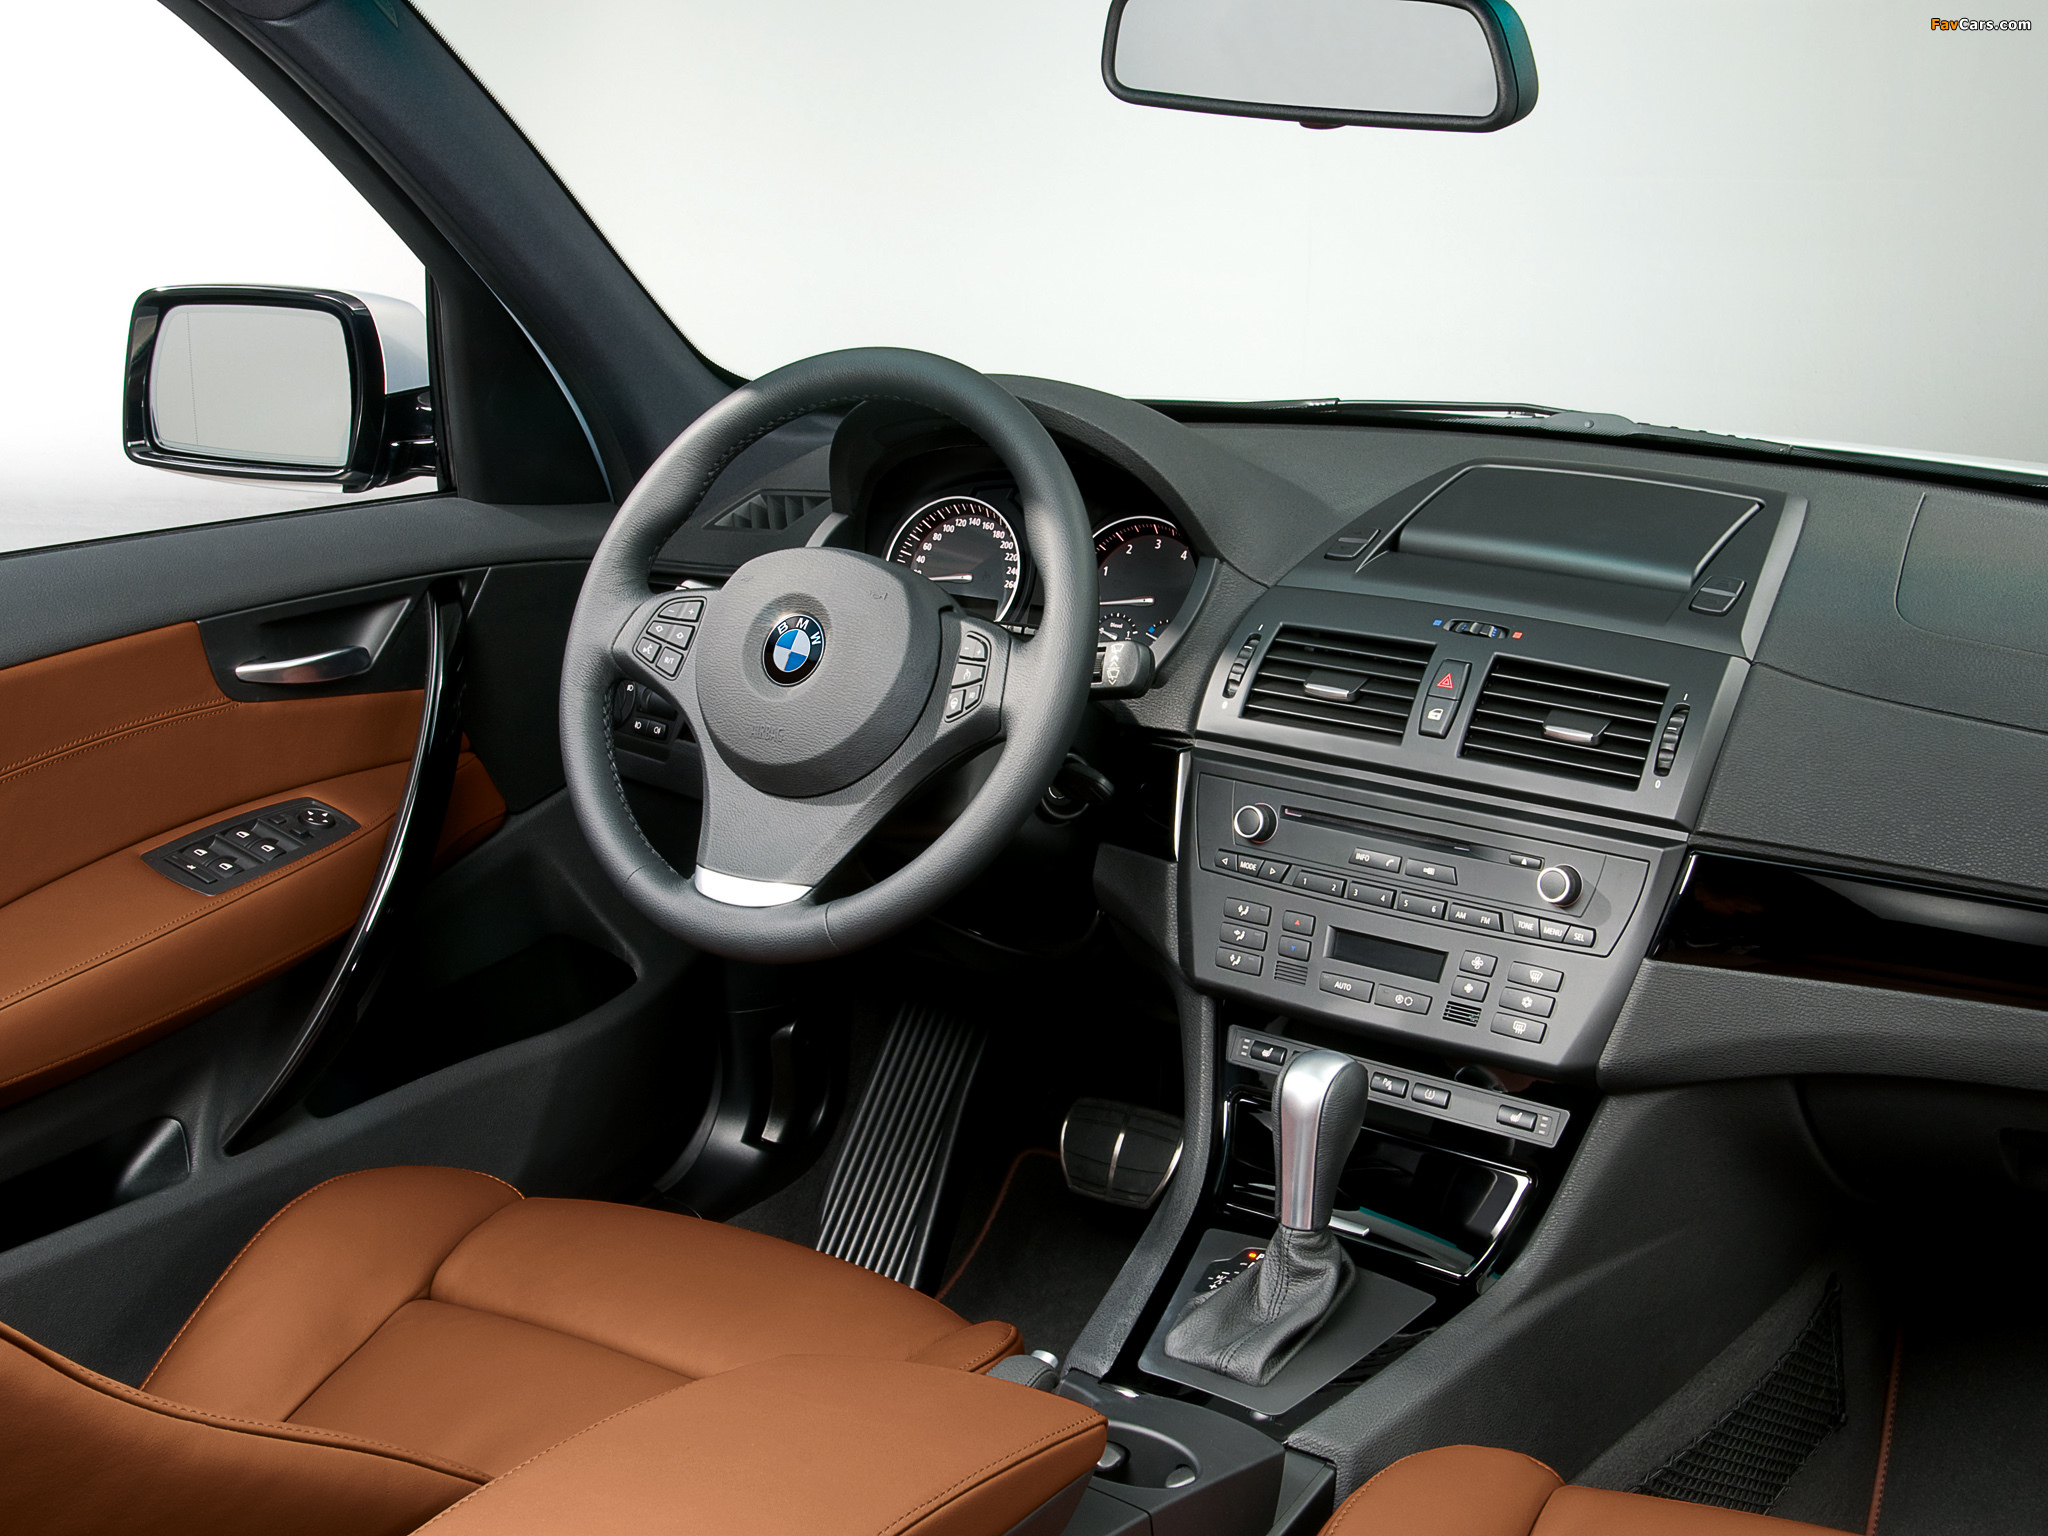 BMW X3 xDrive35d Individual Edition (E83) 2008 wallpapers (2048 x 1536)